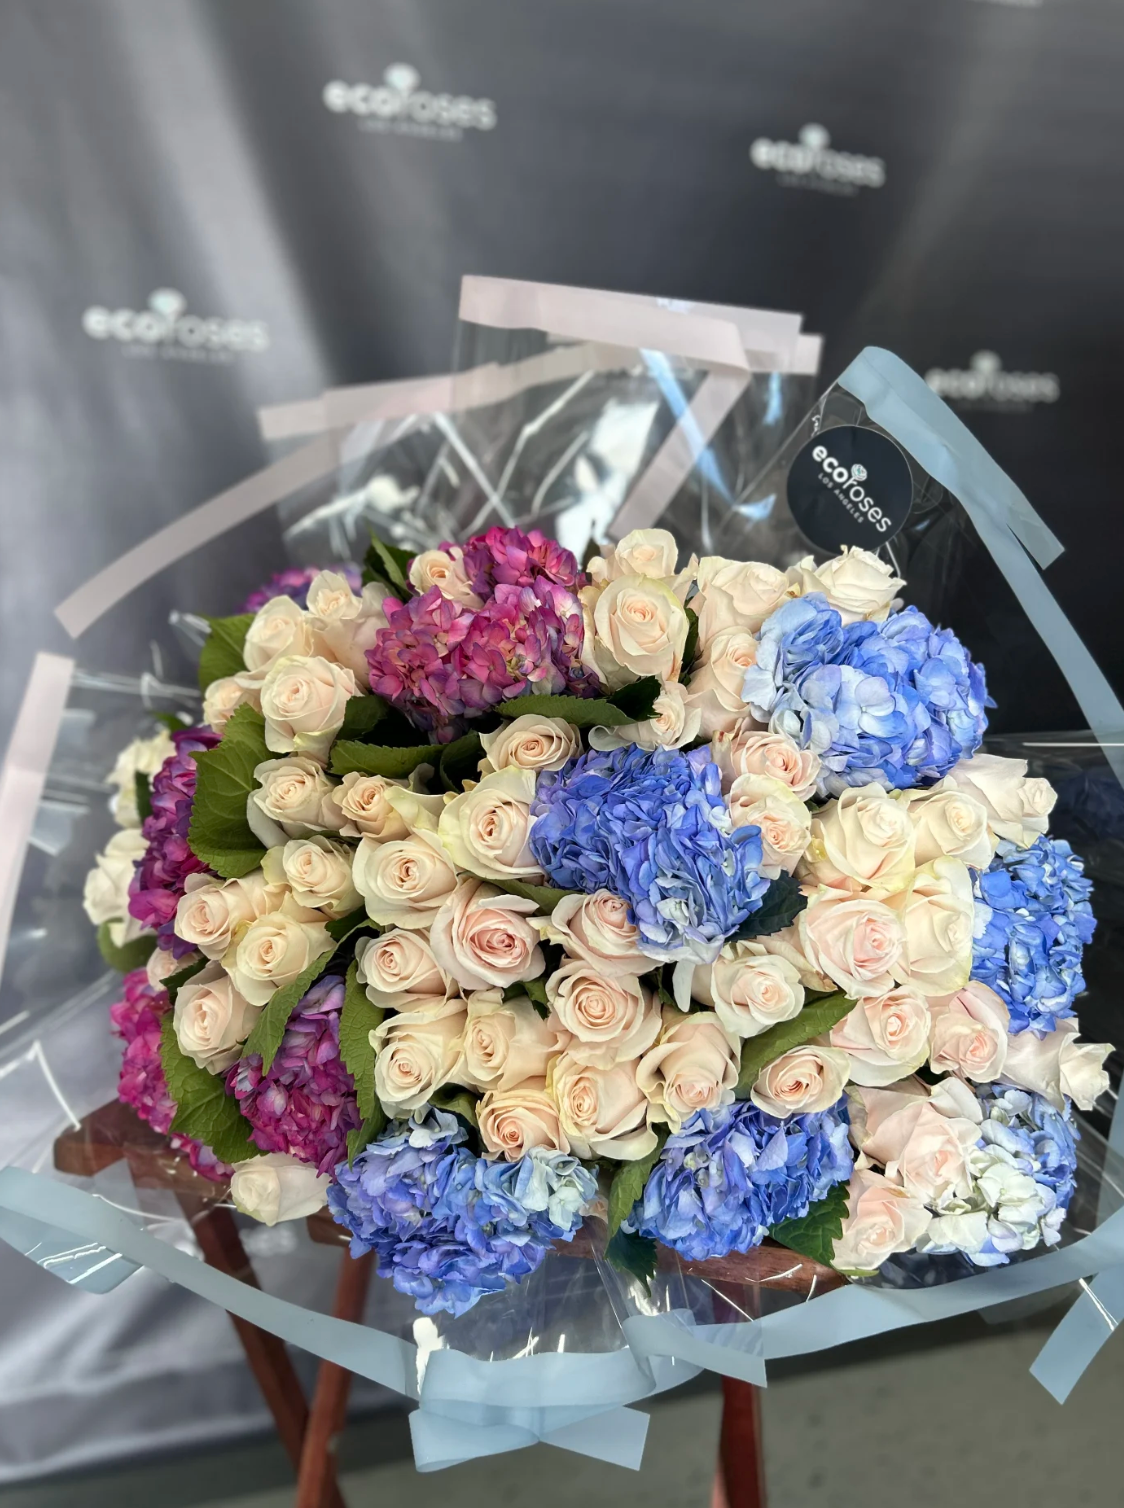 Bouquet named 'EtherealTri-Tone', featuring a delicate harmony of three distinct colors, creating a light, ethereal visual experience Glendale Florist